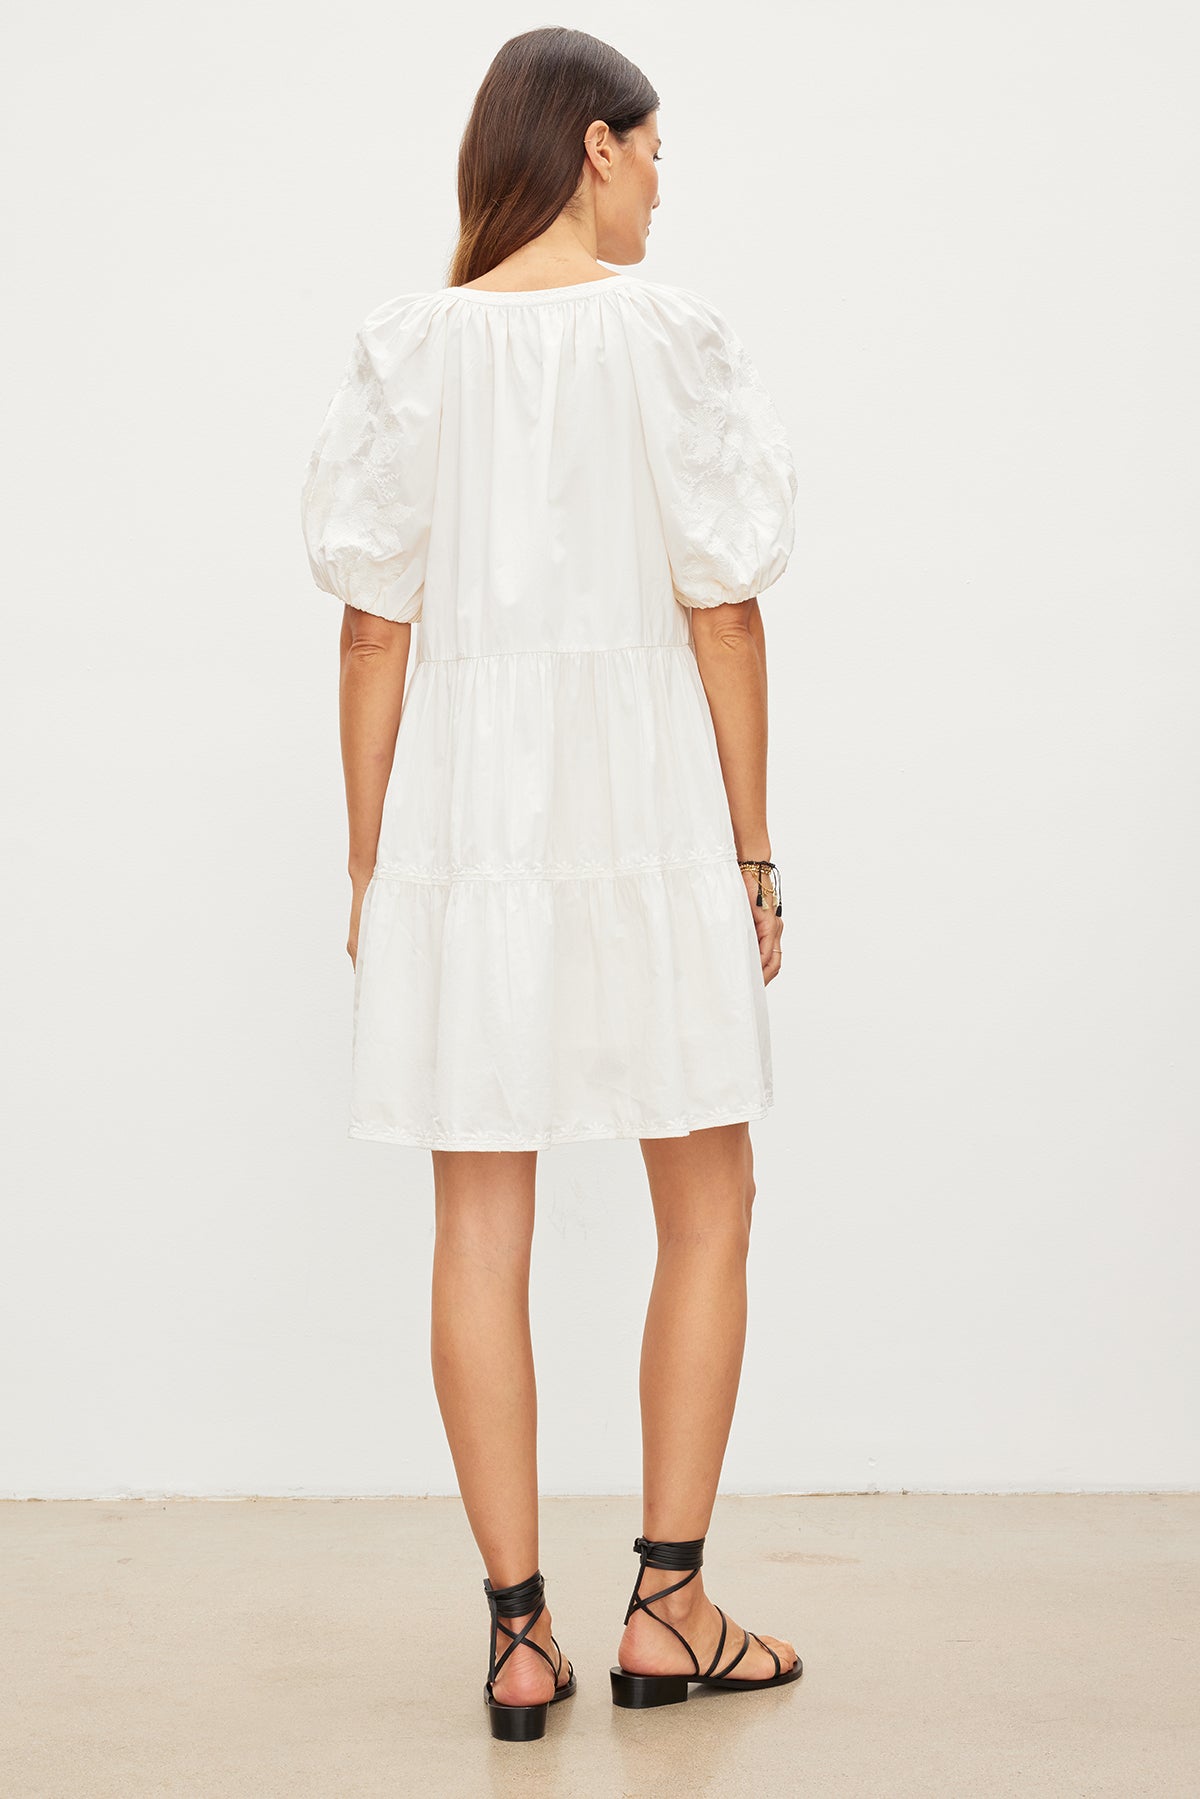 Woman standing with her back to the camera, wearing a white puff-sleeve CHRISSY EMBROIDERED BOHO DRESS by Velvet by Graham & Spencer and black strappy sandals, in a neutral-colored room.-35955557531841